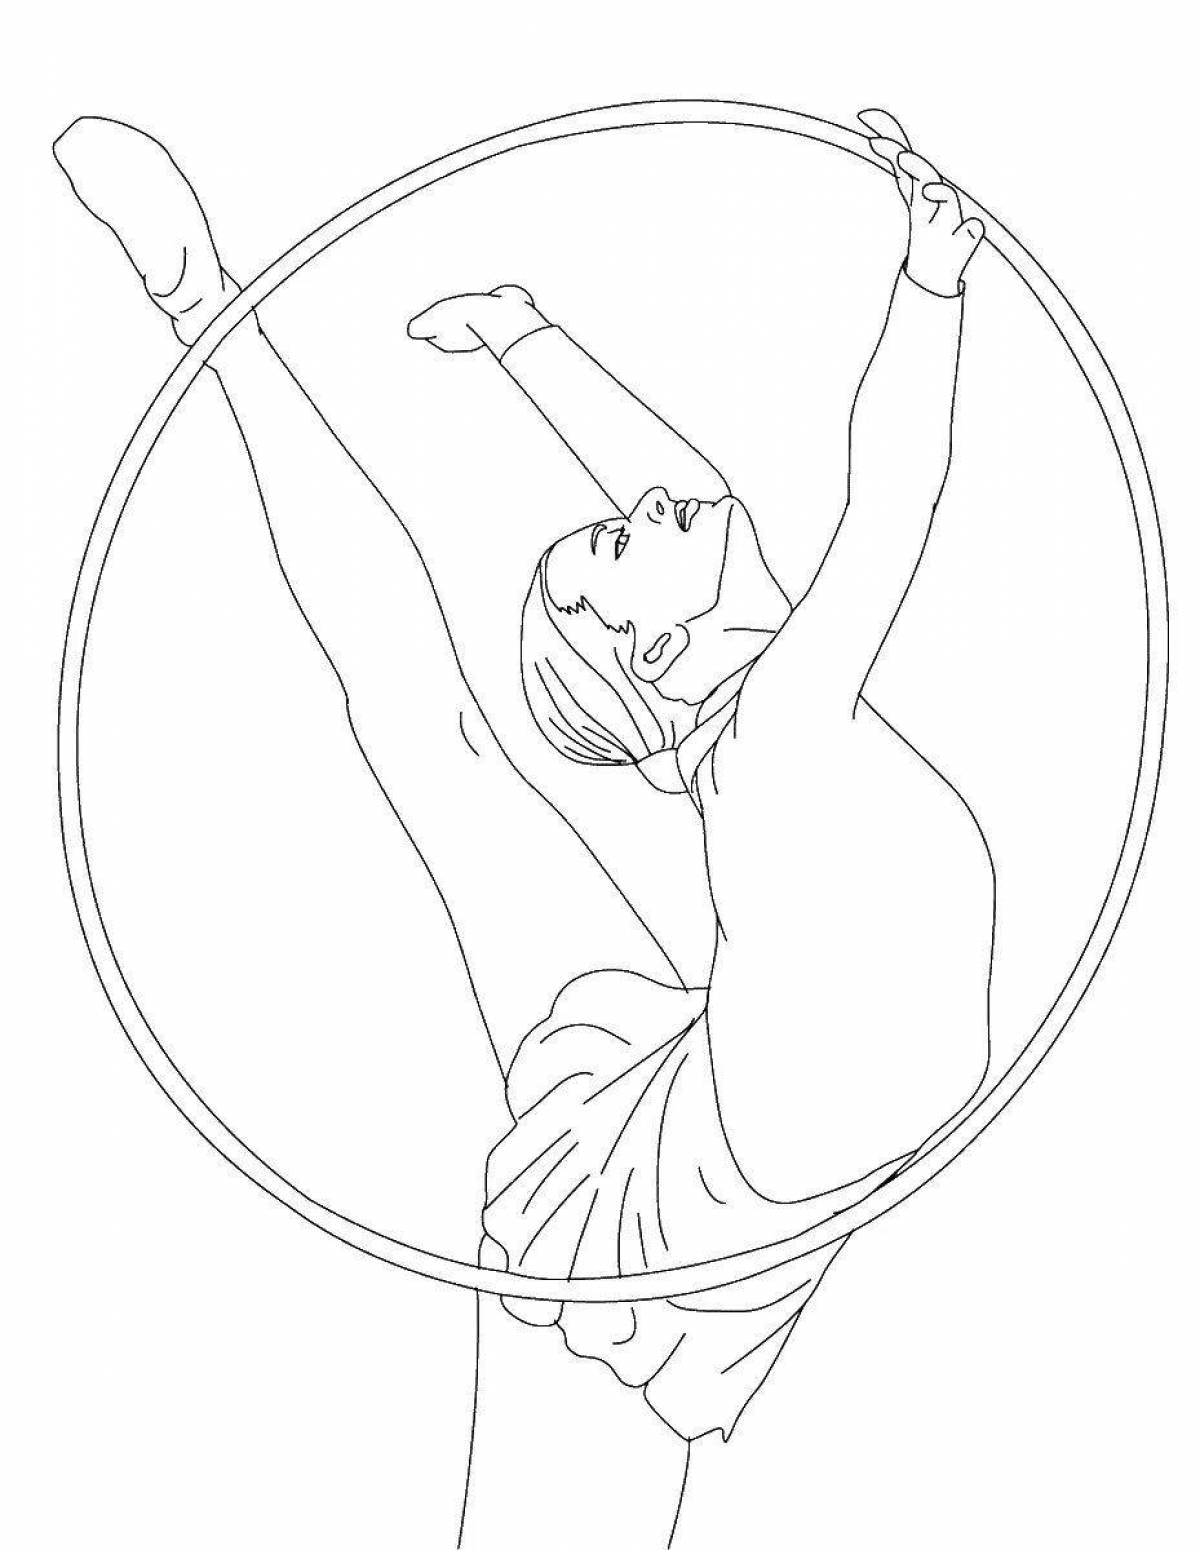 Coloring page enthusiastic gymnasts